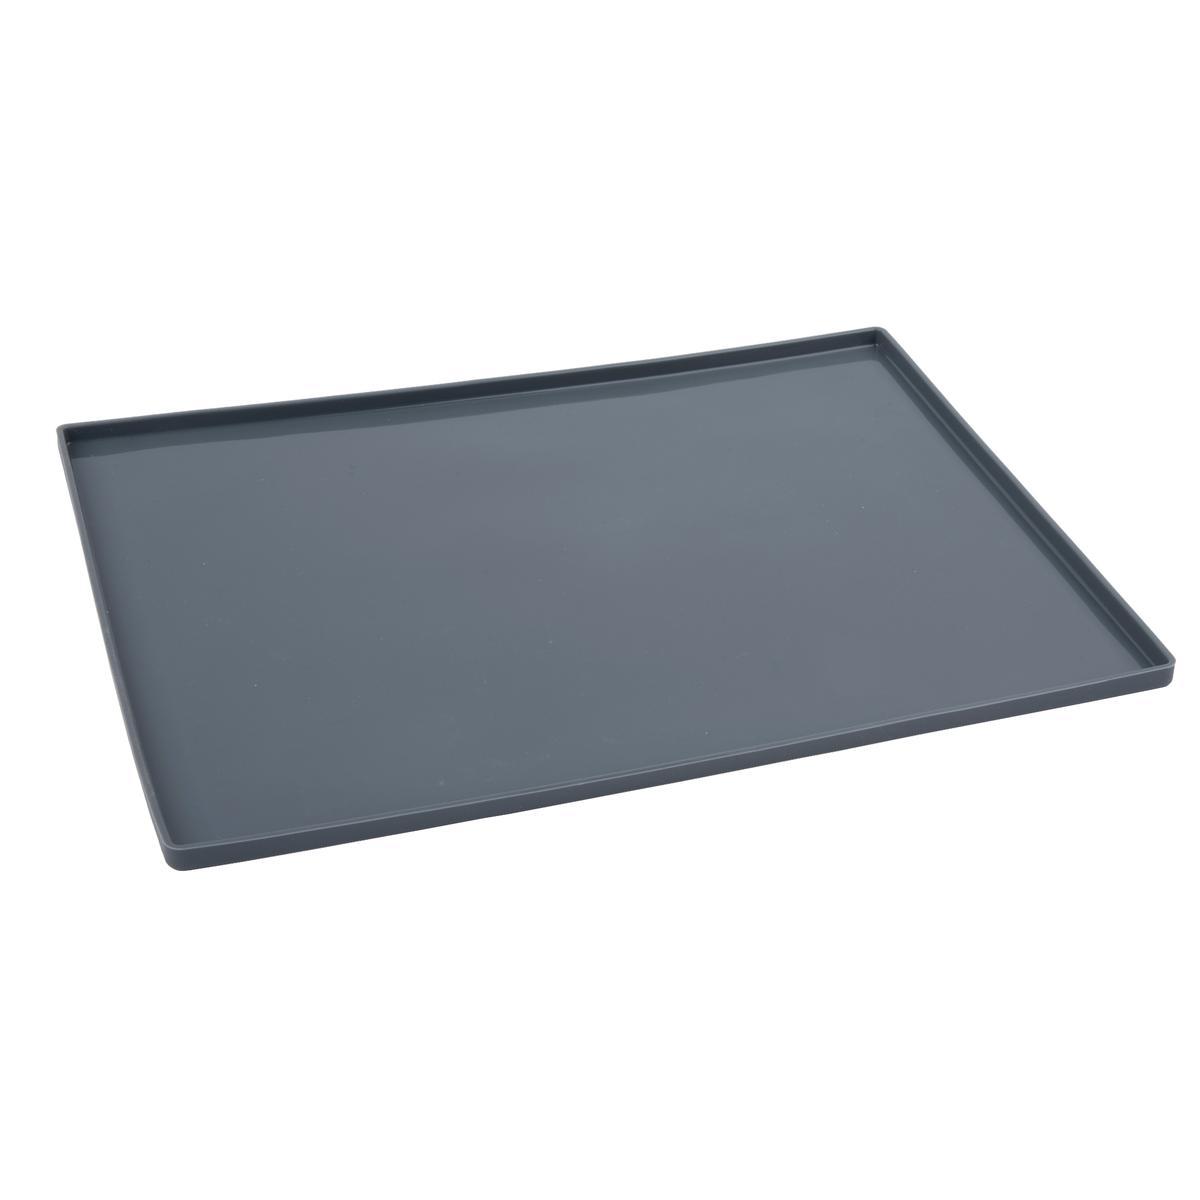 Tapis silicone lisse avec rebords - 320x555x6 mm